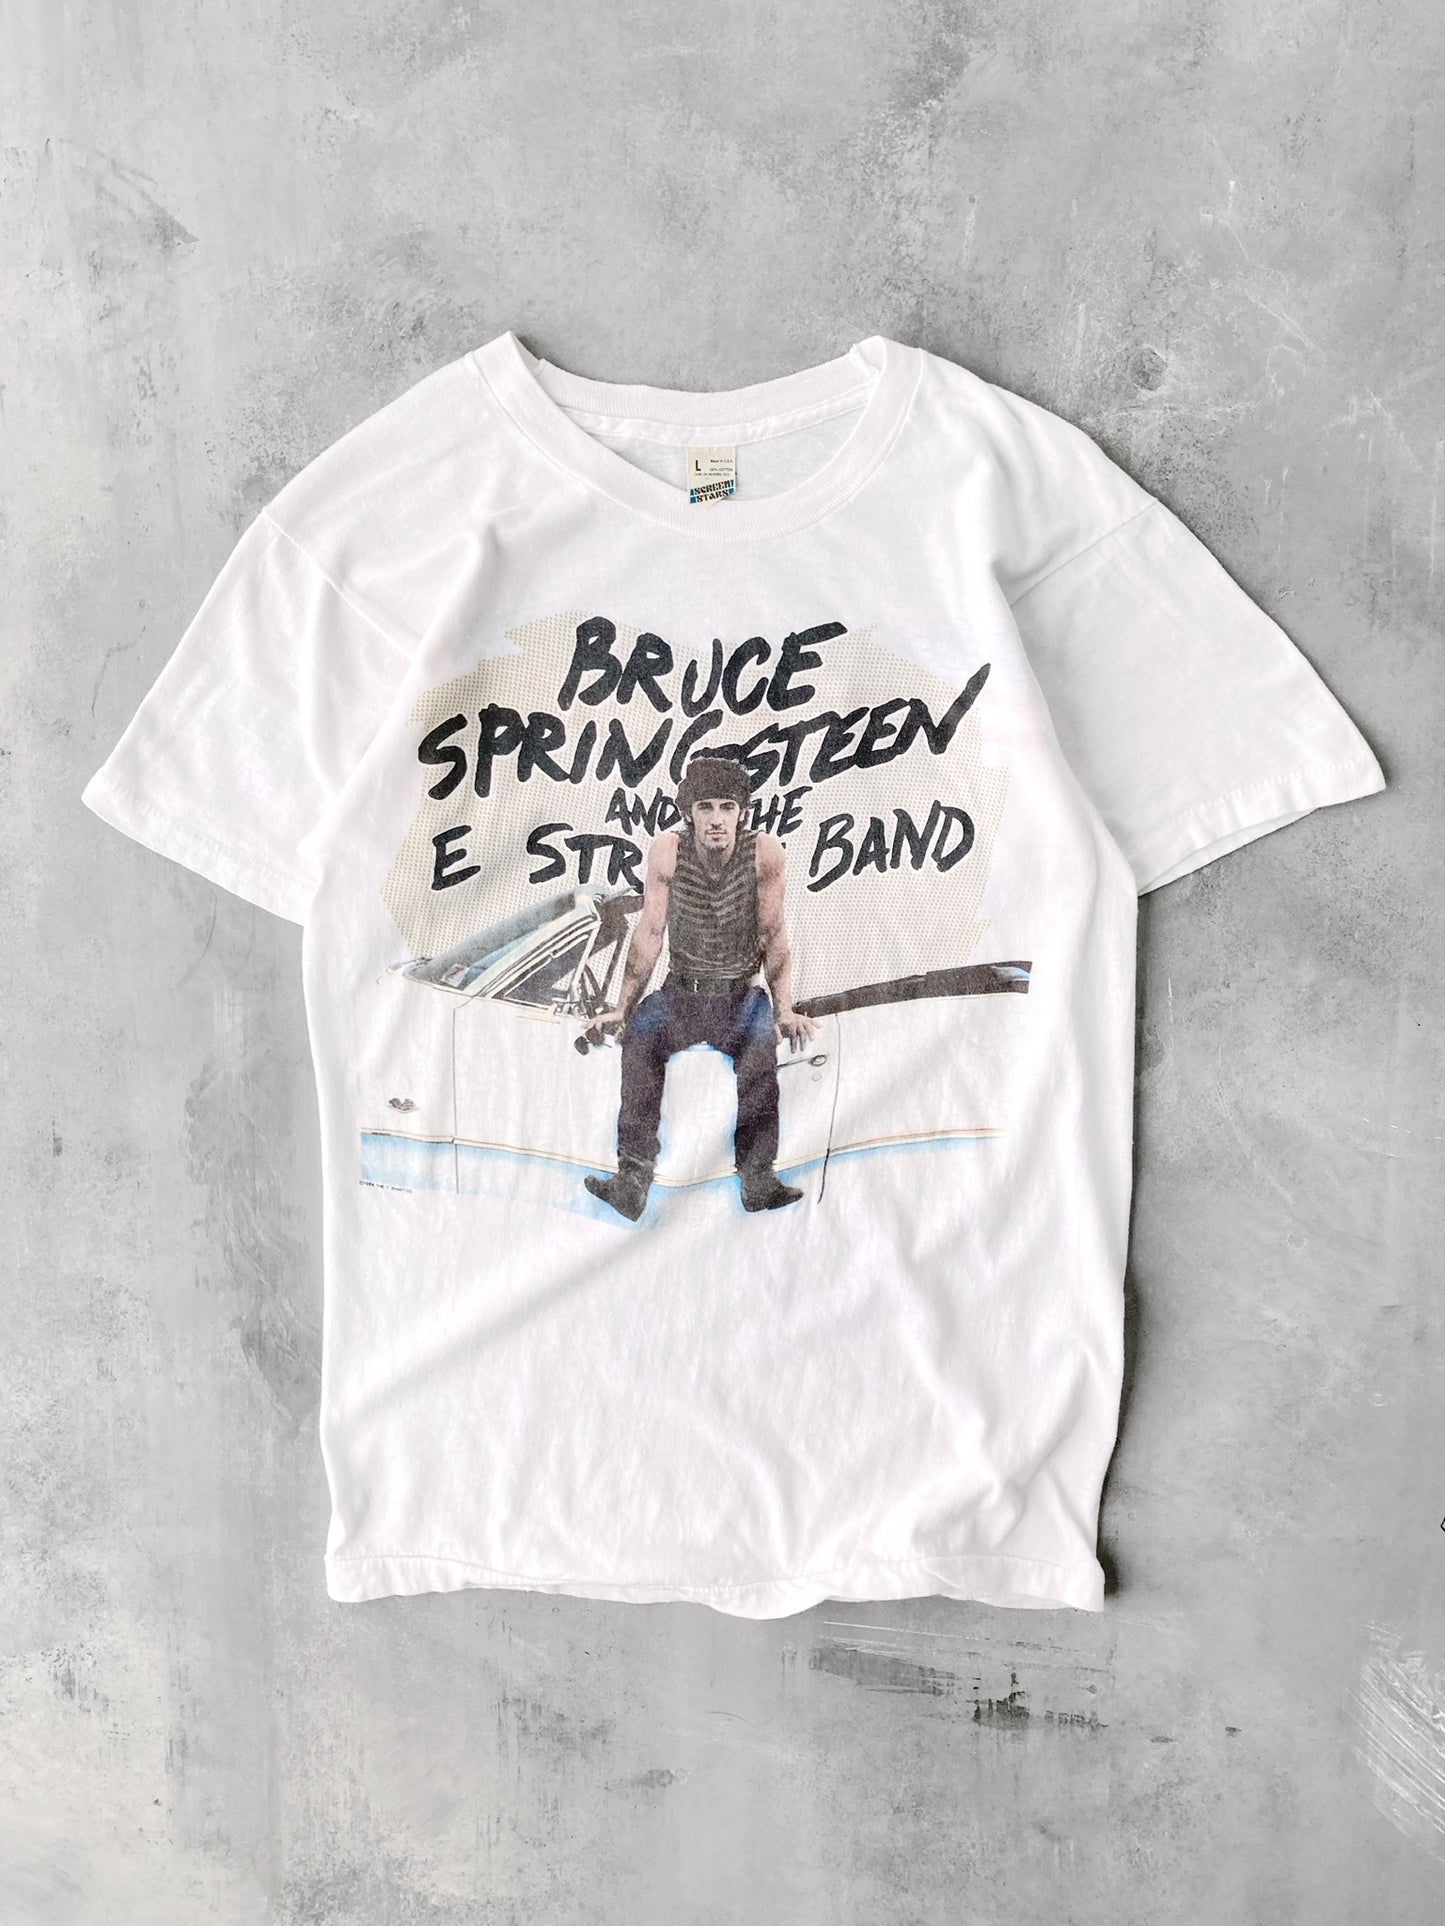 Bruce Springsteen and the E Street Band T-Shirt '84 - Small